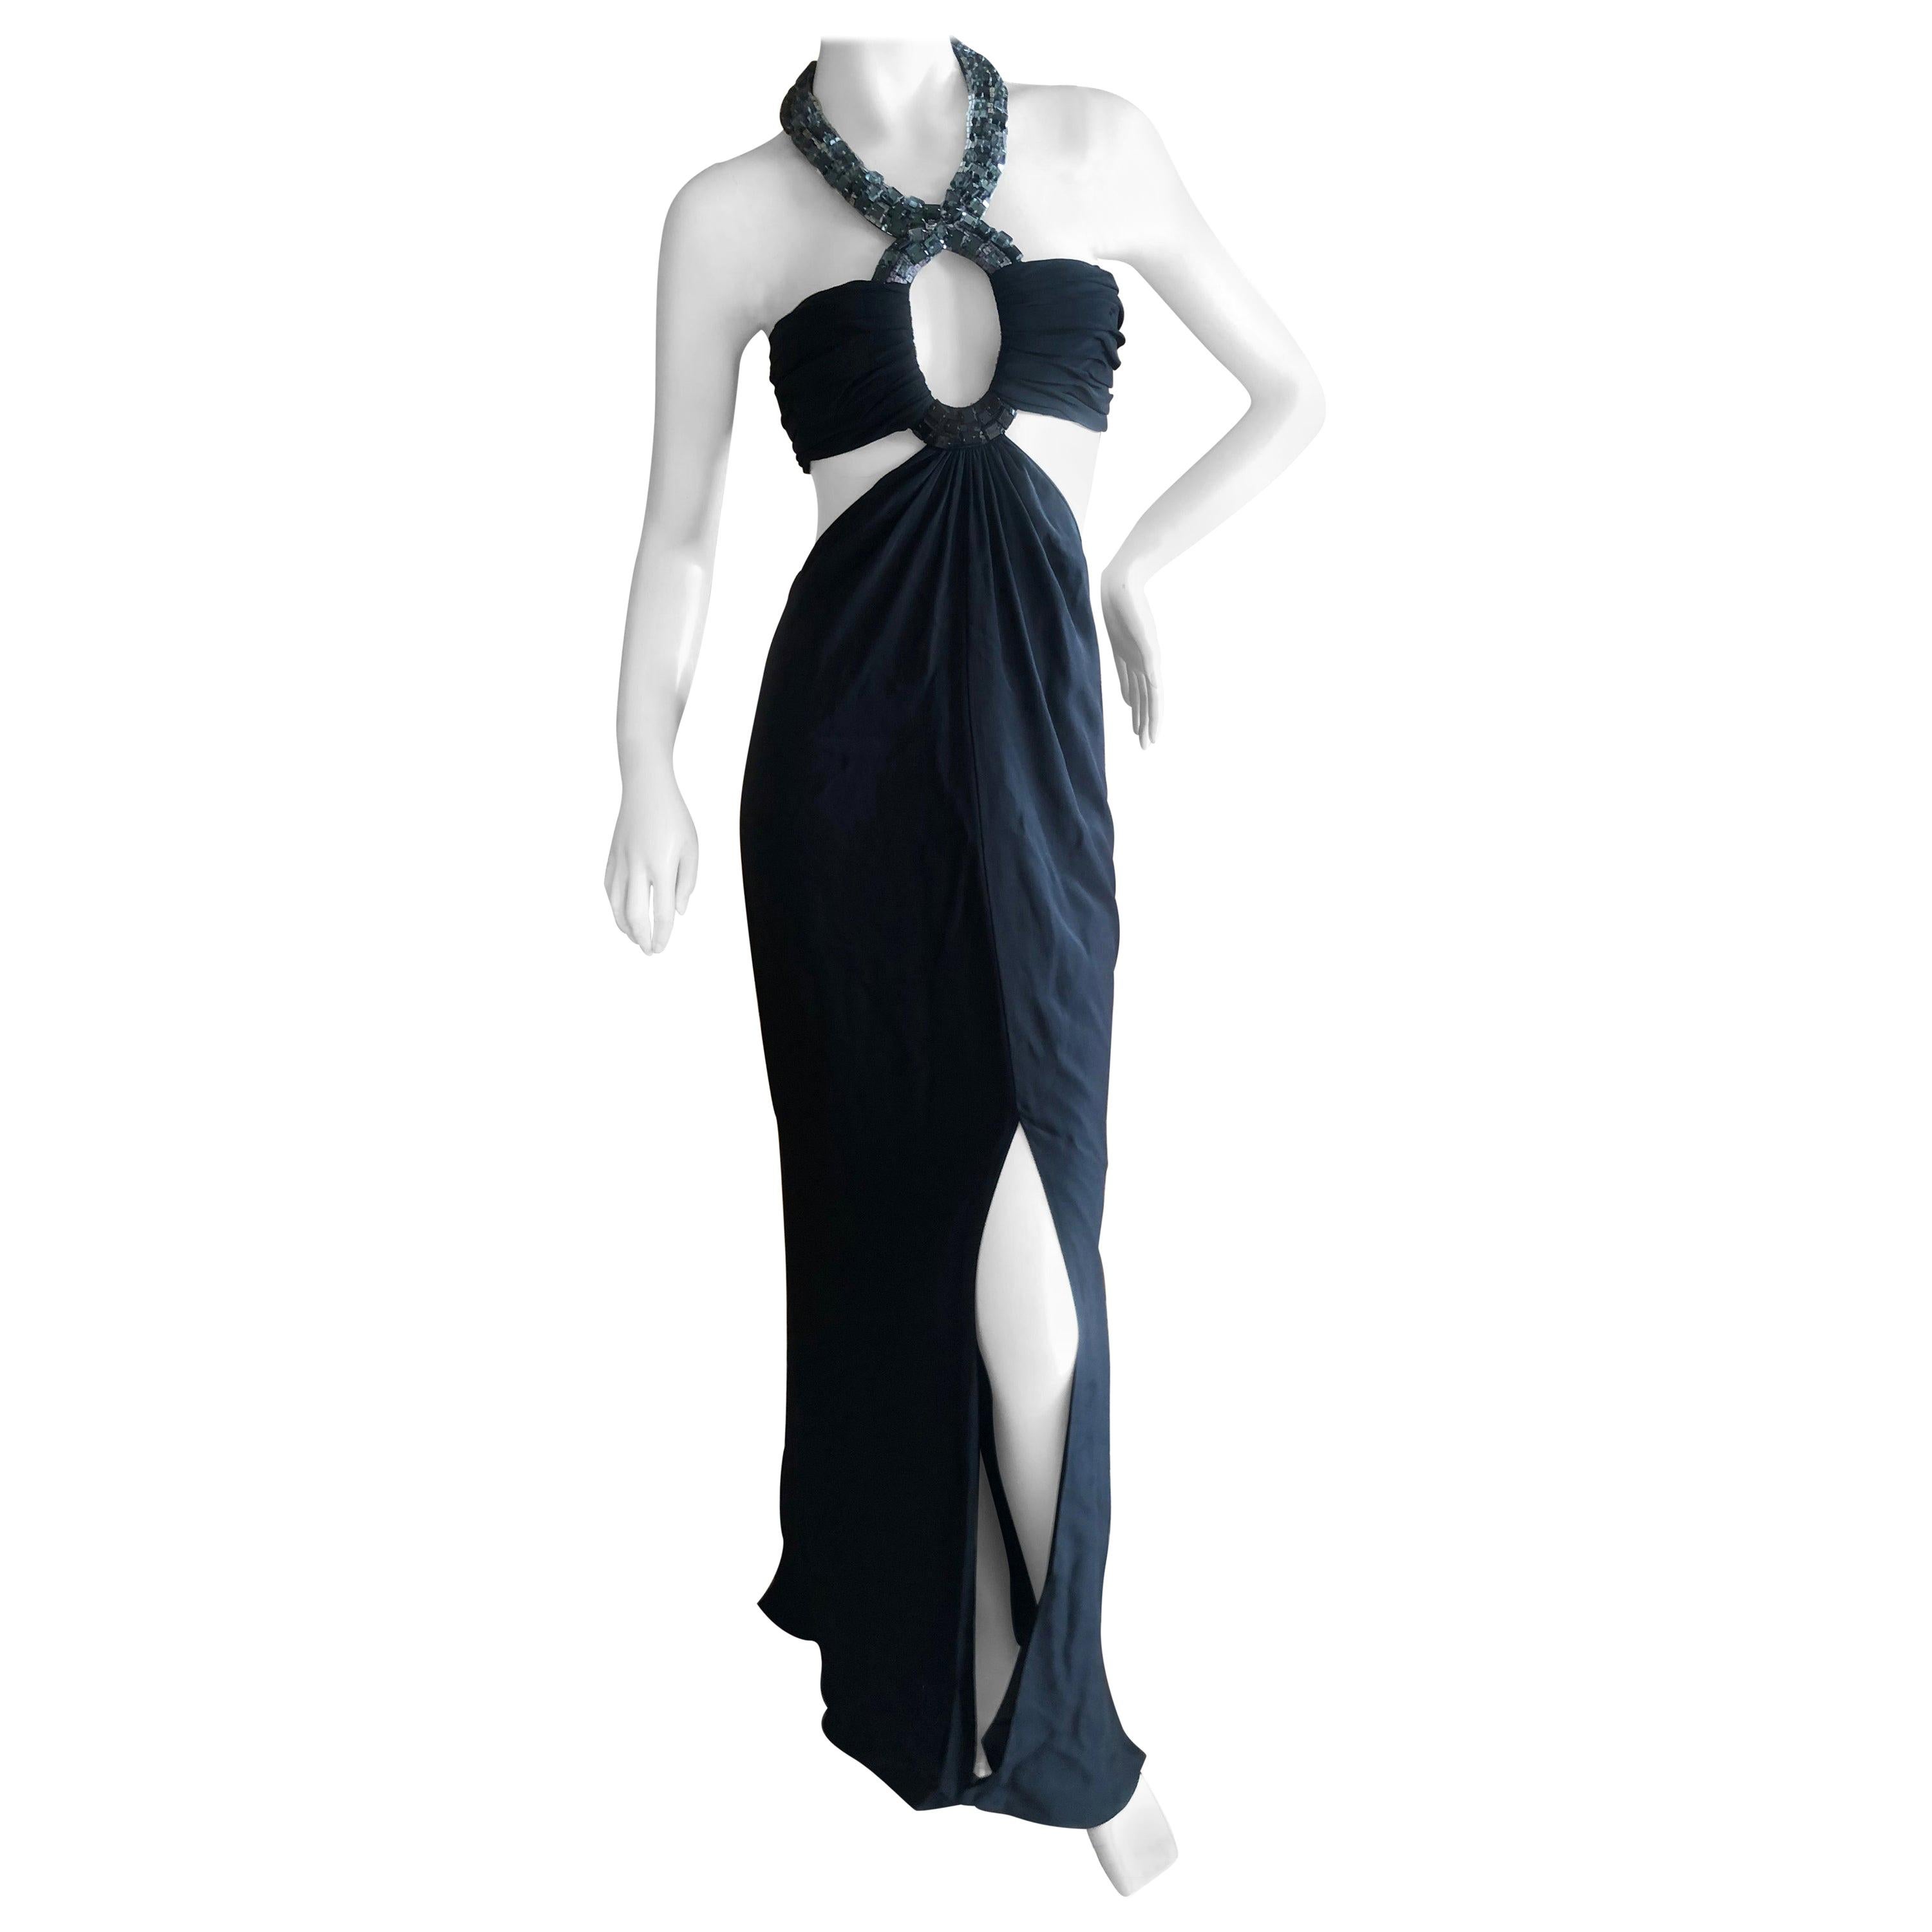 Azzaro Black Cut Out Evening Dress with Bold Crystal Jewel Details For Sale